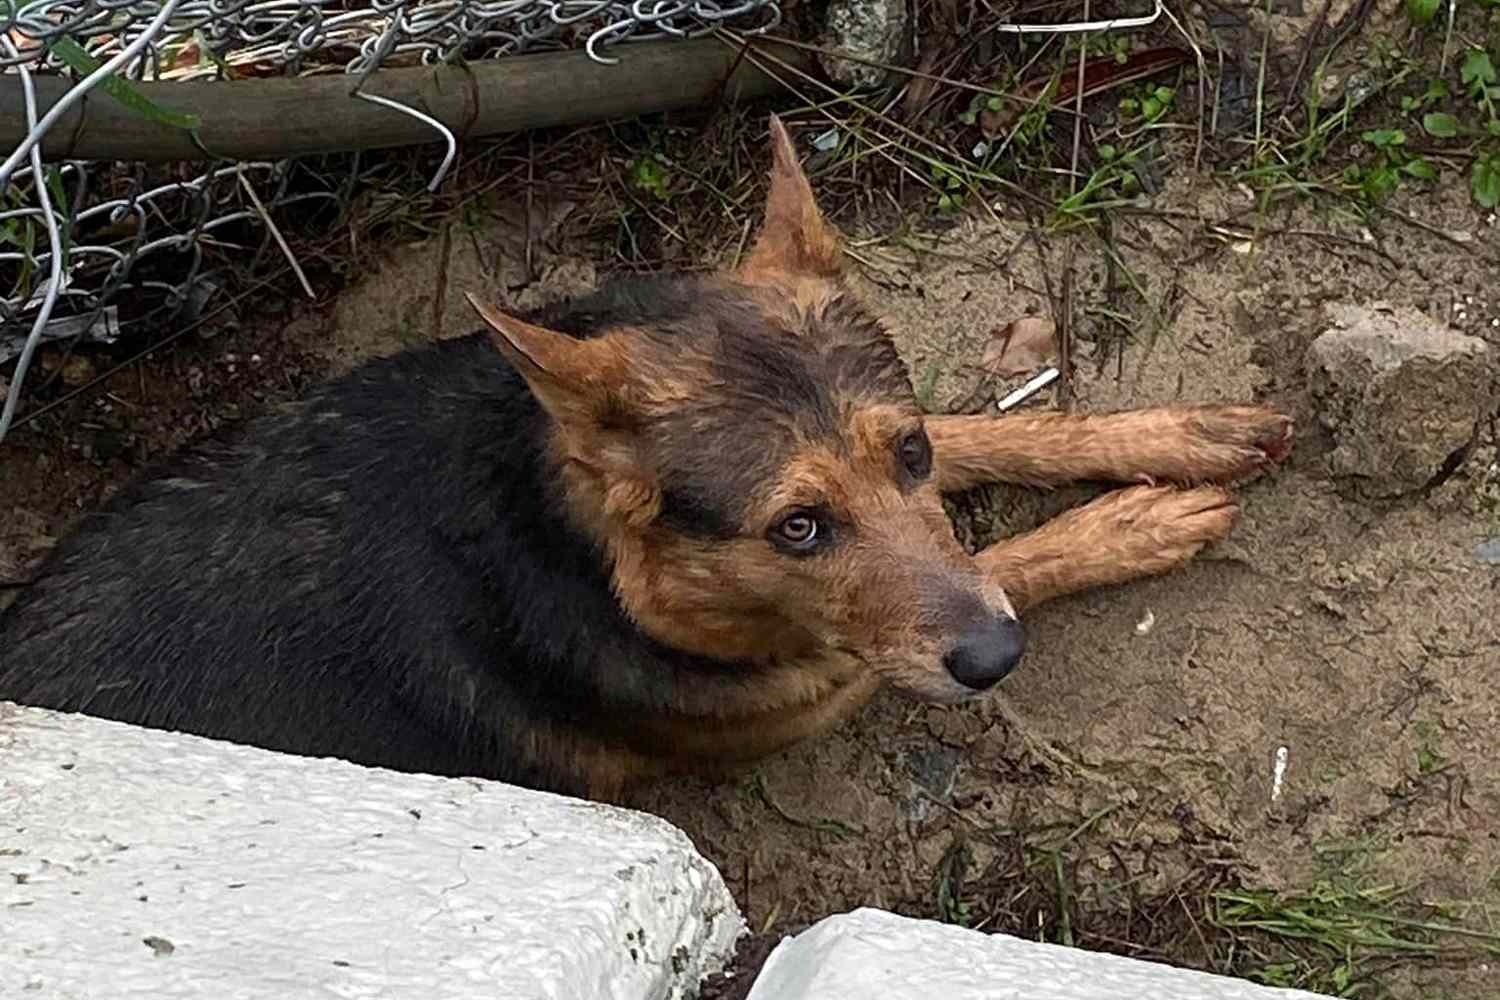 Man Risks It All to Save Beloved Dog from Rushing Waters